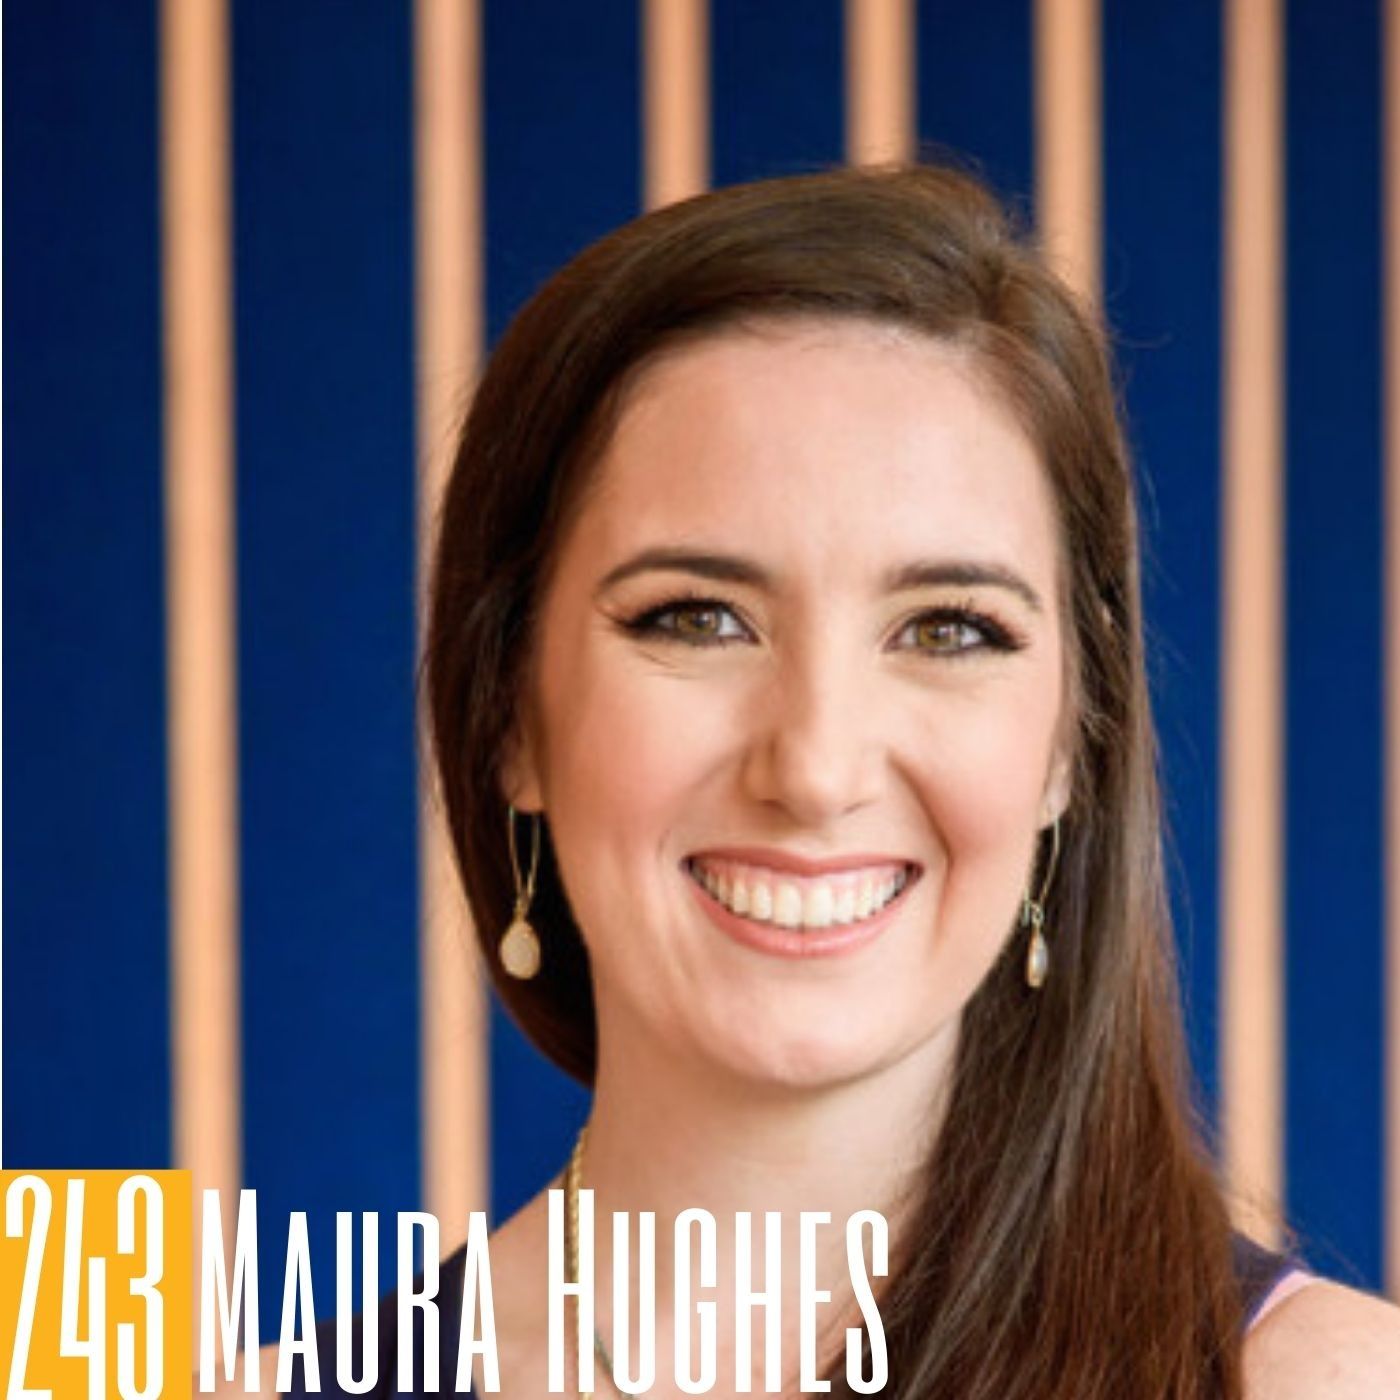 243 Maura Hughes - Podcasting is a Community